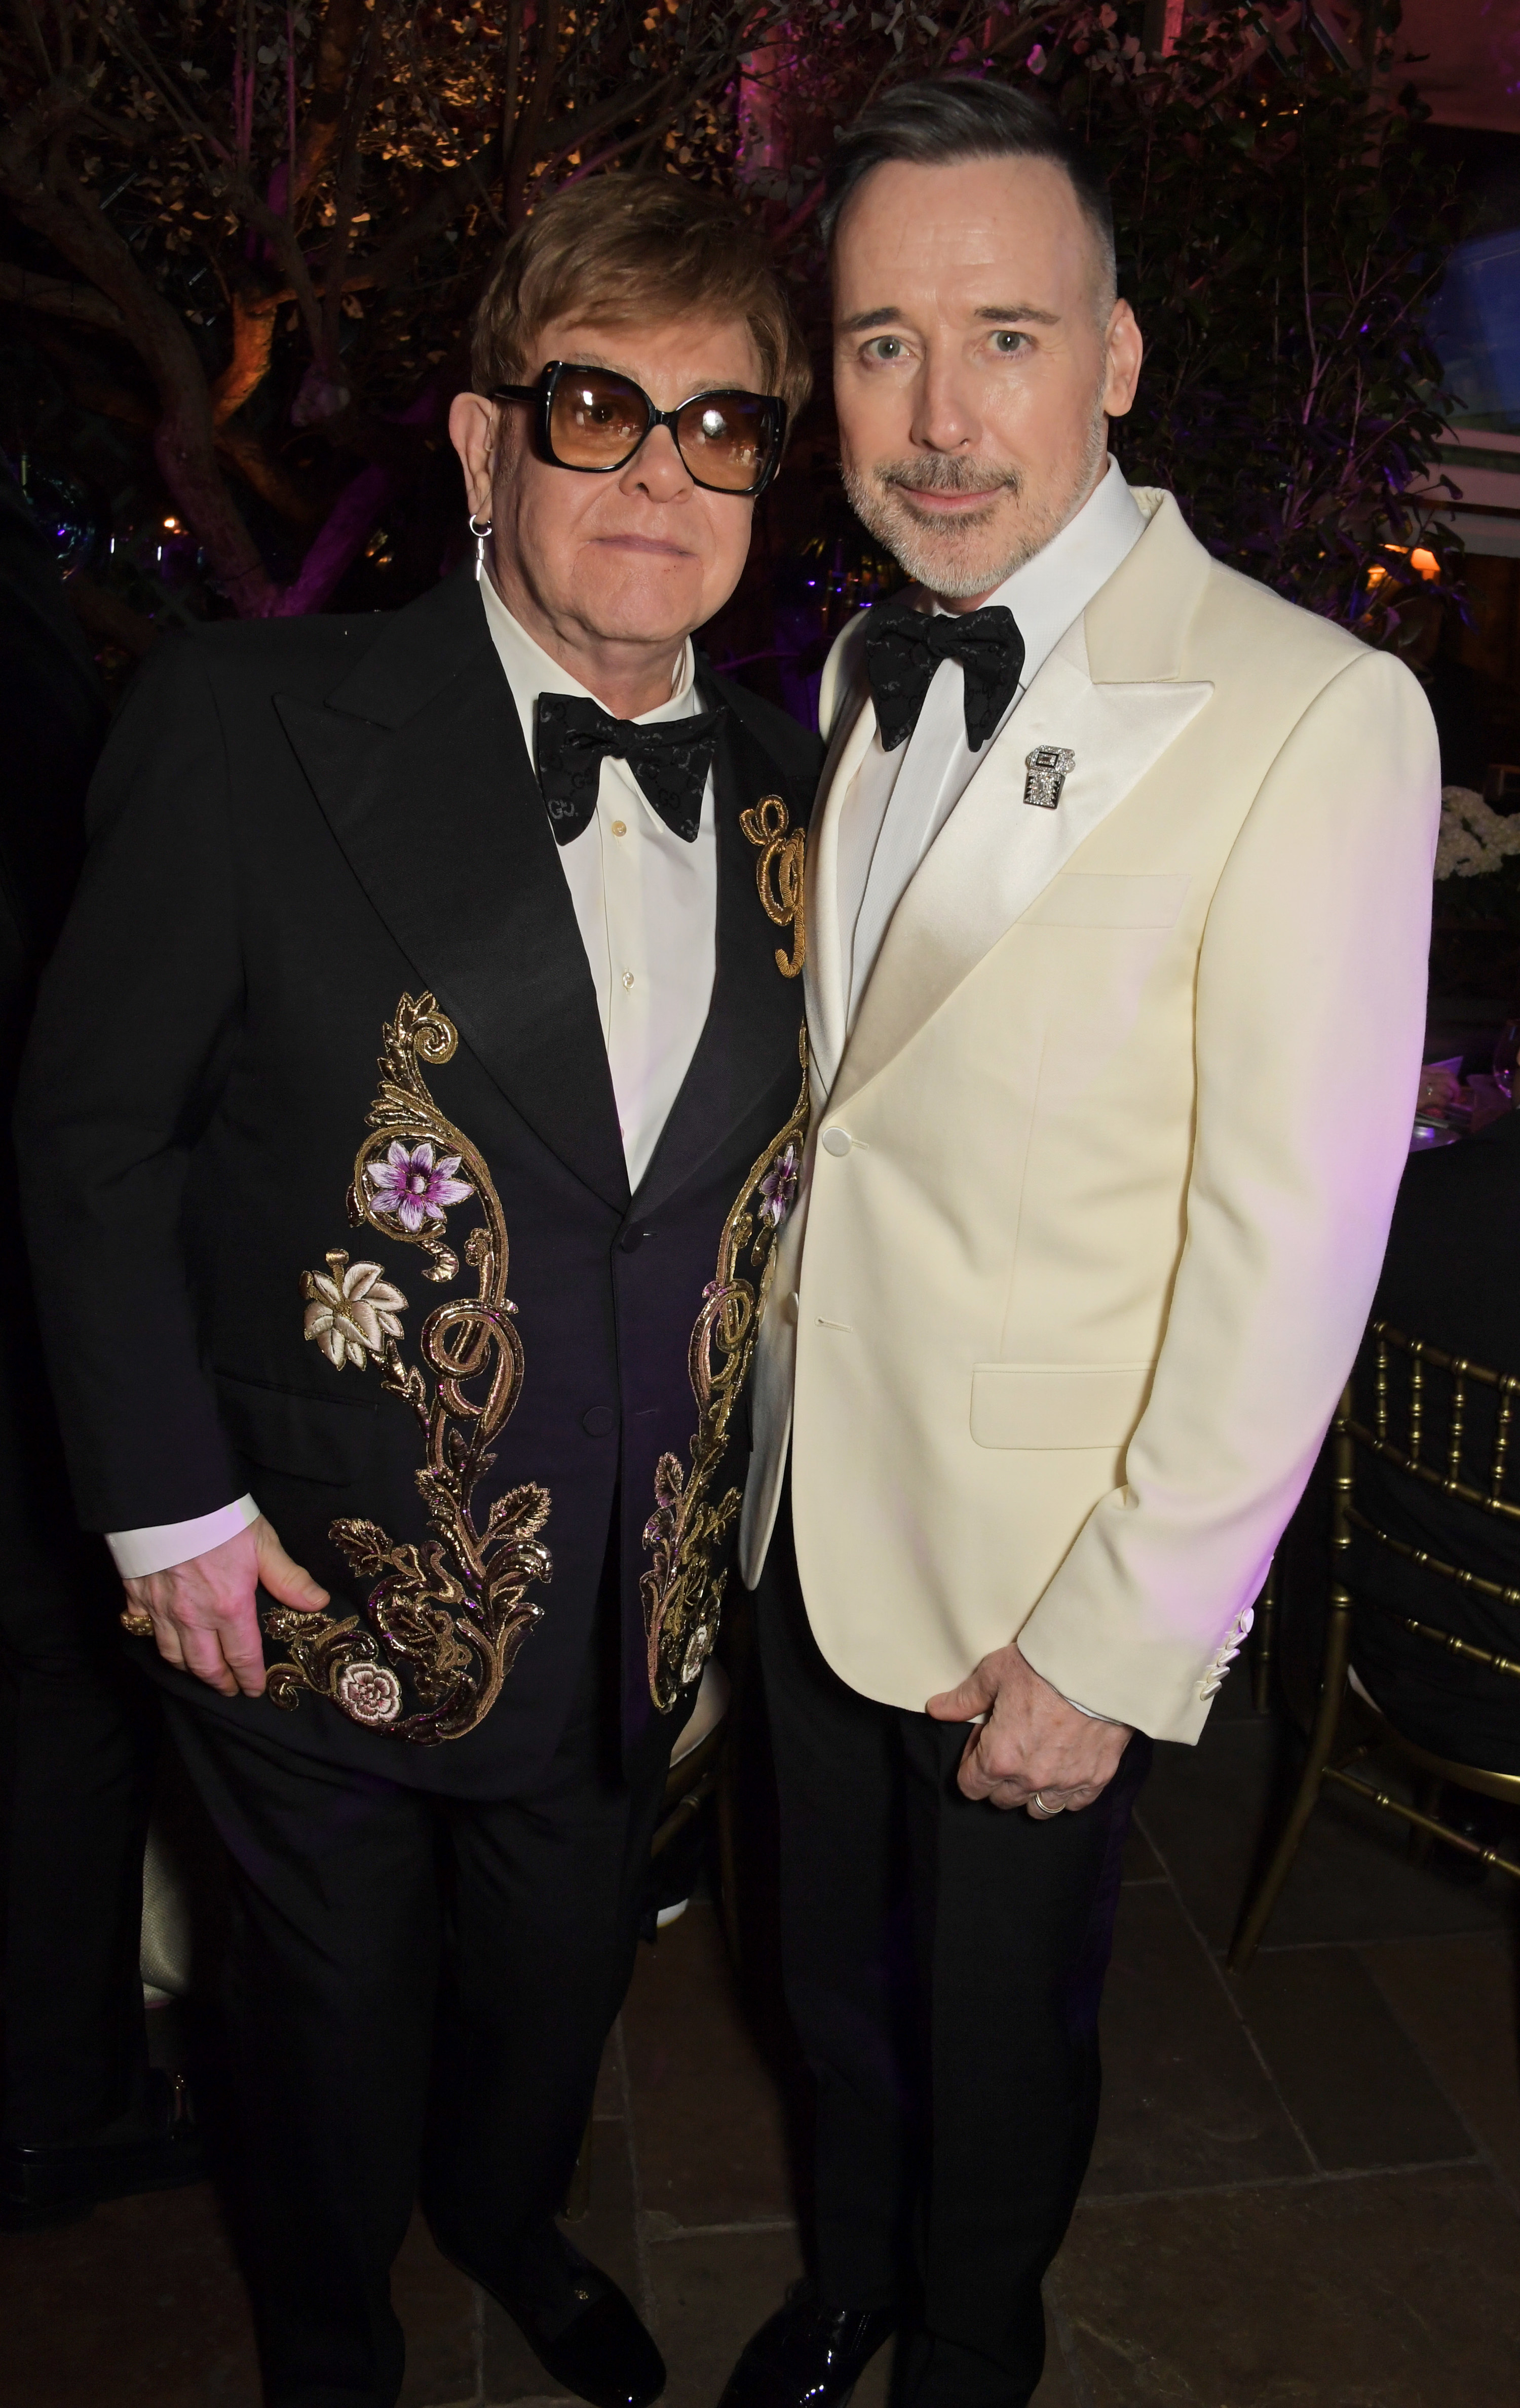 Elton John and David Furnish stand together at a formal event